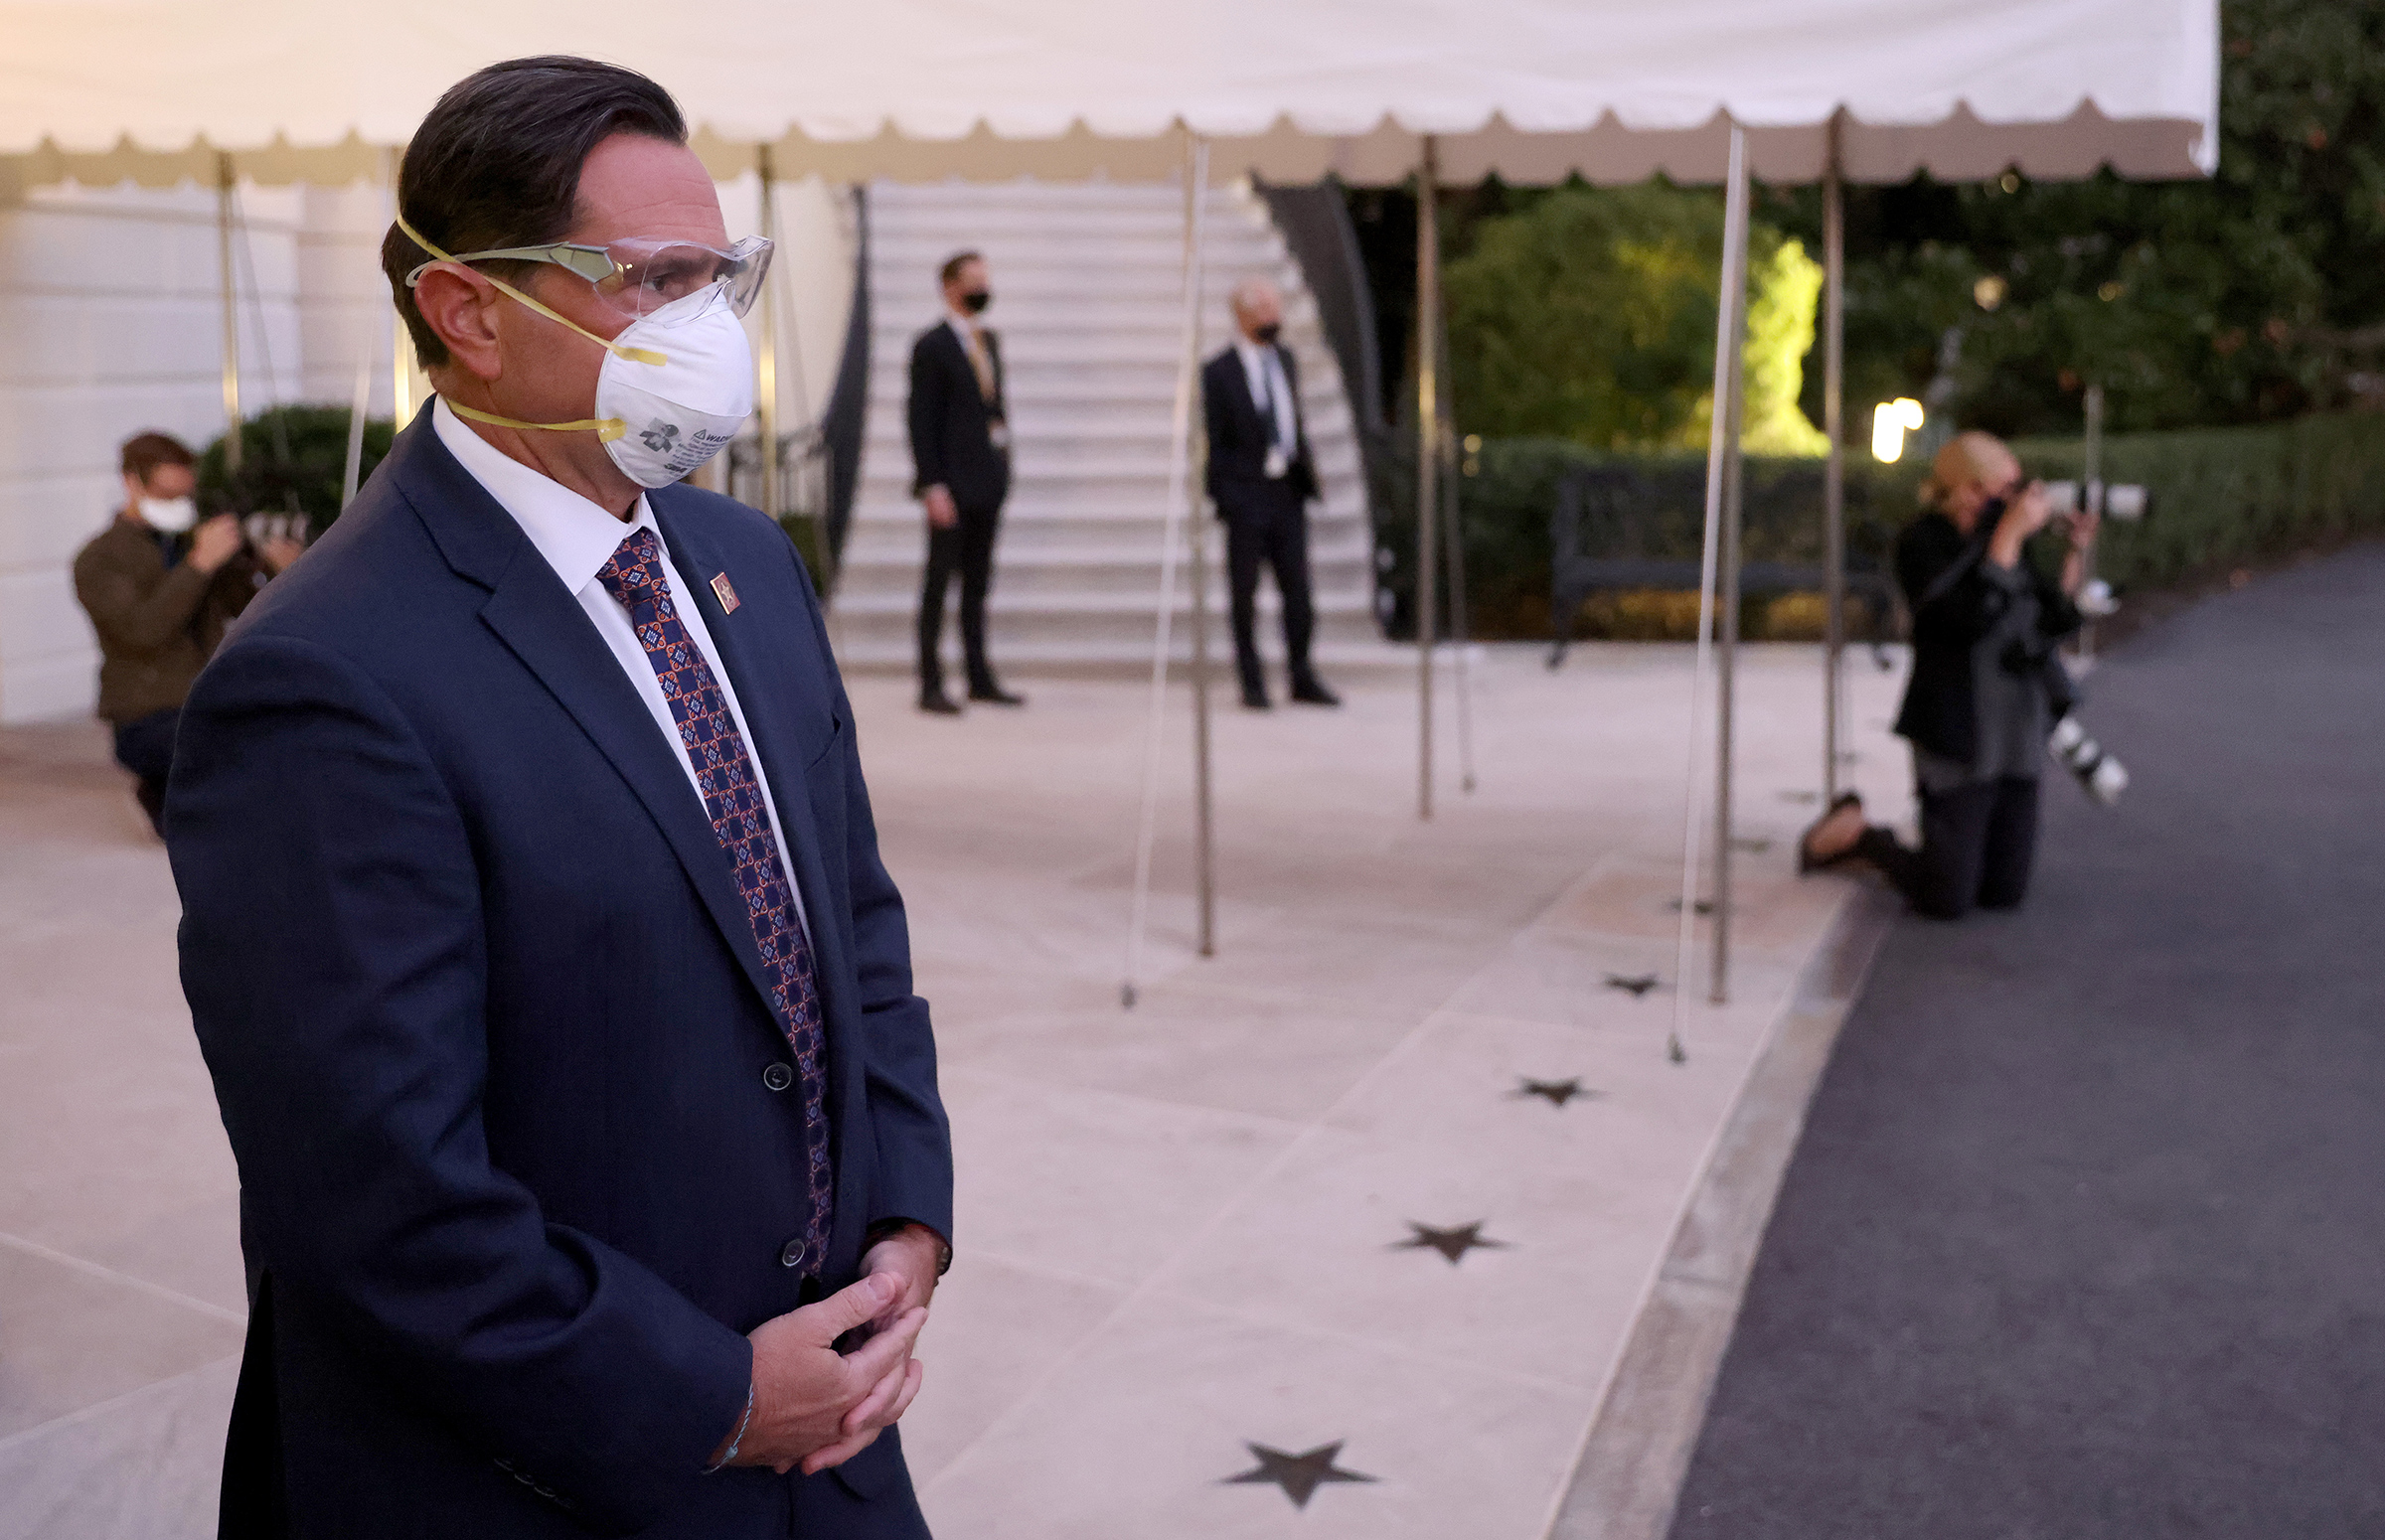 U.S. Service members wear masks and eye protection before President Trump's return to the White House from Walter Reed National Military Medical Center on Oct. 05